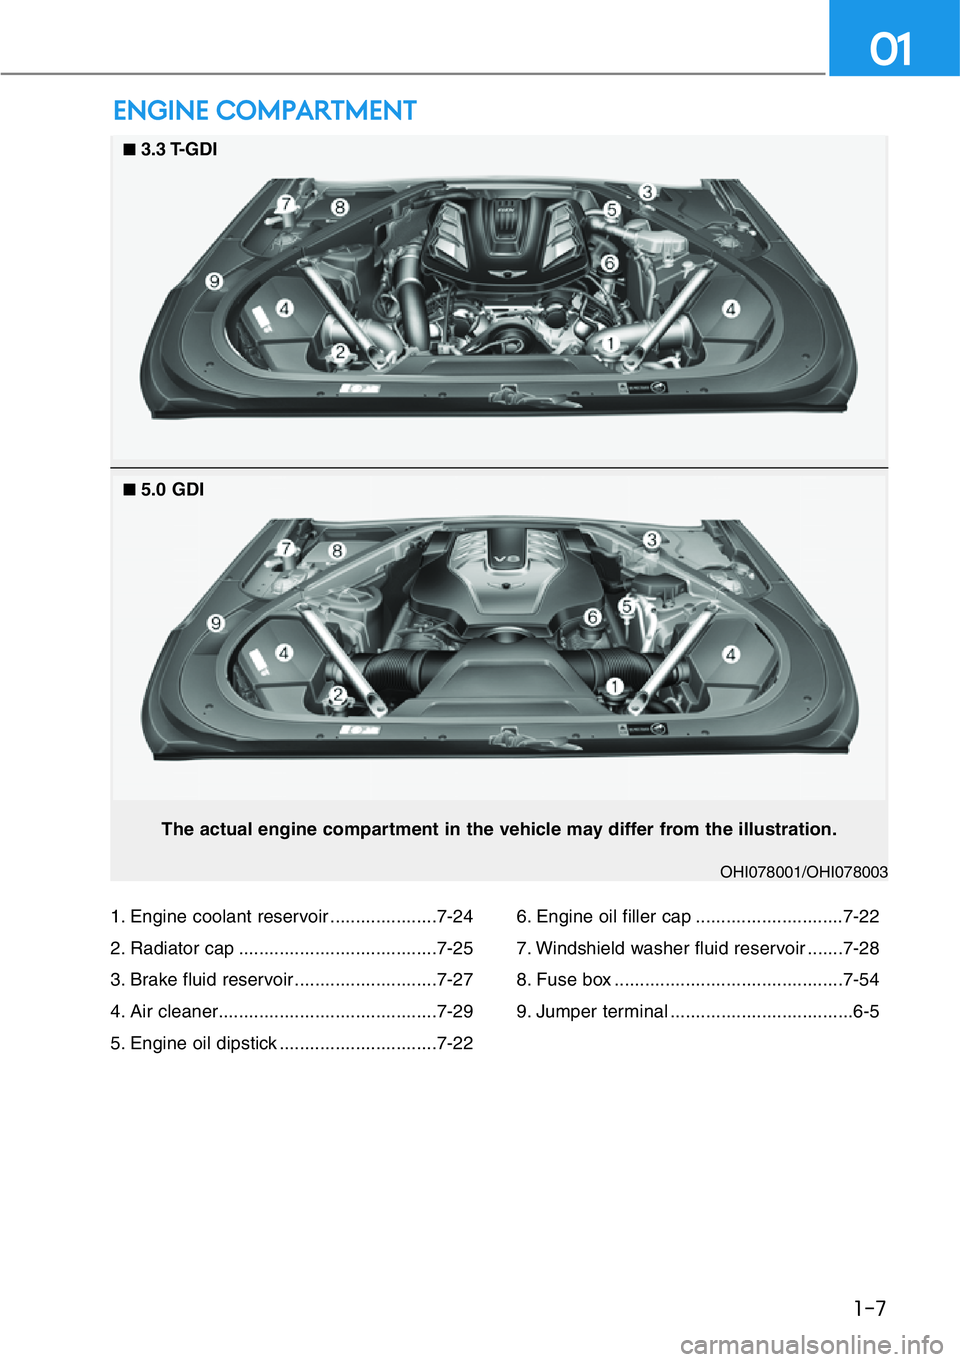 GENESIS G90 2021  Owners Manual ENGINE COMPARTMENT
OHI078001/OHI078003
The actual engine compartment in the vehicle may differ from the illustration.
1-7
01
1. Engine coolant reservoir .....................7-24
2. Radiator cap .....